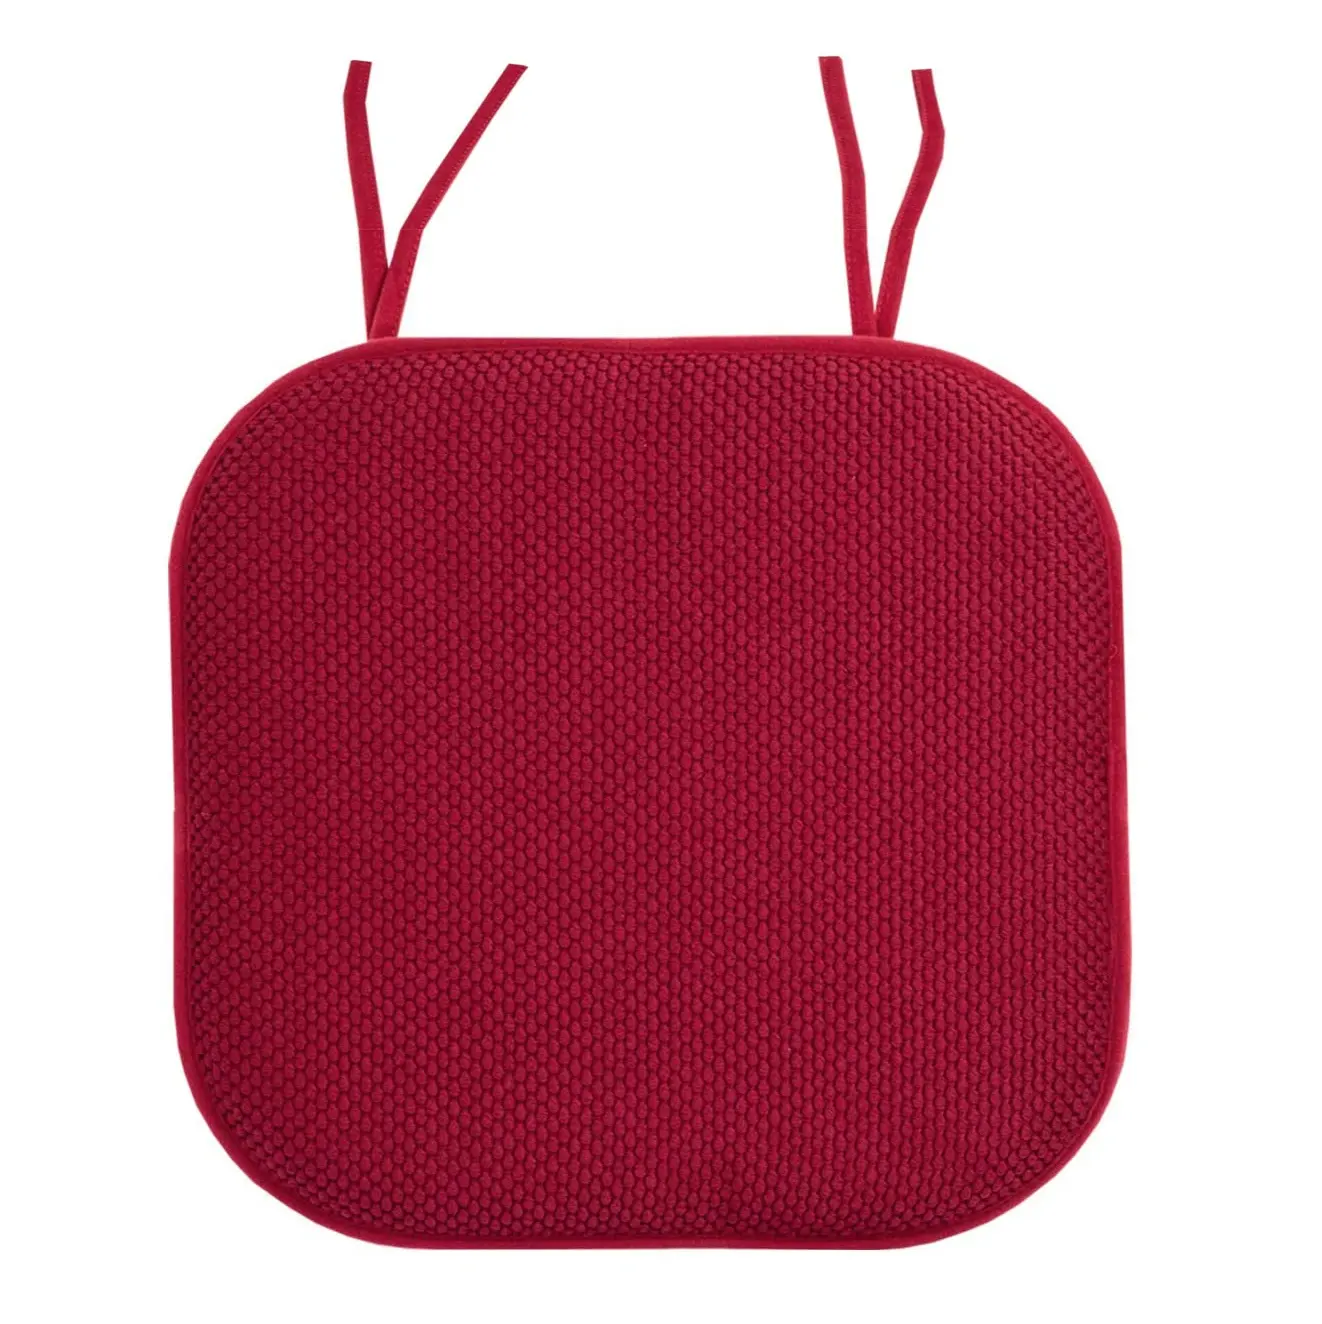 Square Thick Chair Pad with Ties Non Slip Soft and Comfortable Seat Cushions for Kitchen Dining Office Chair Cushions for home